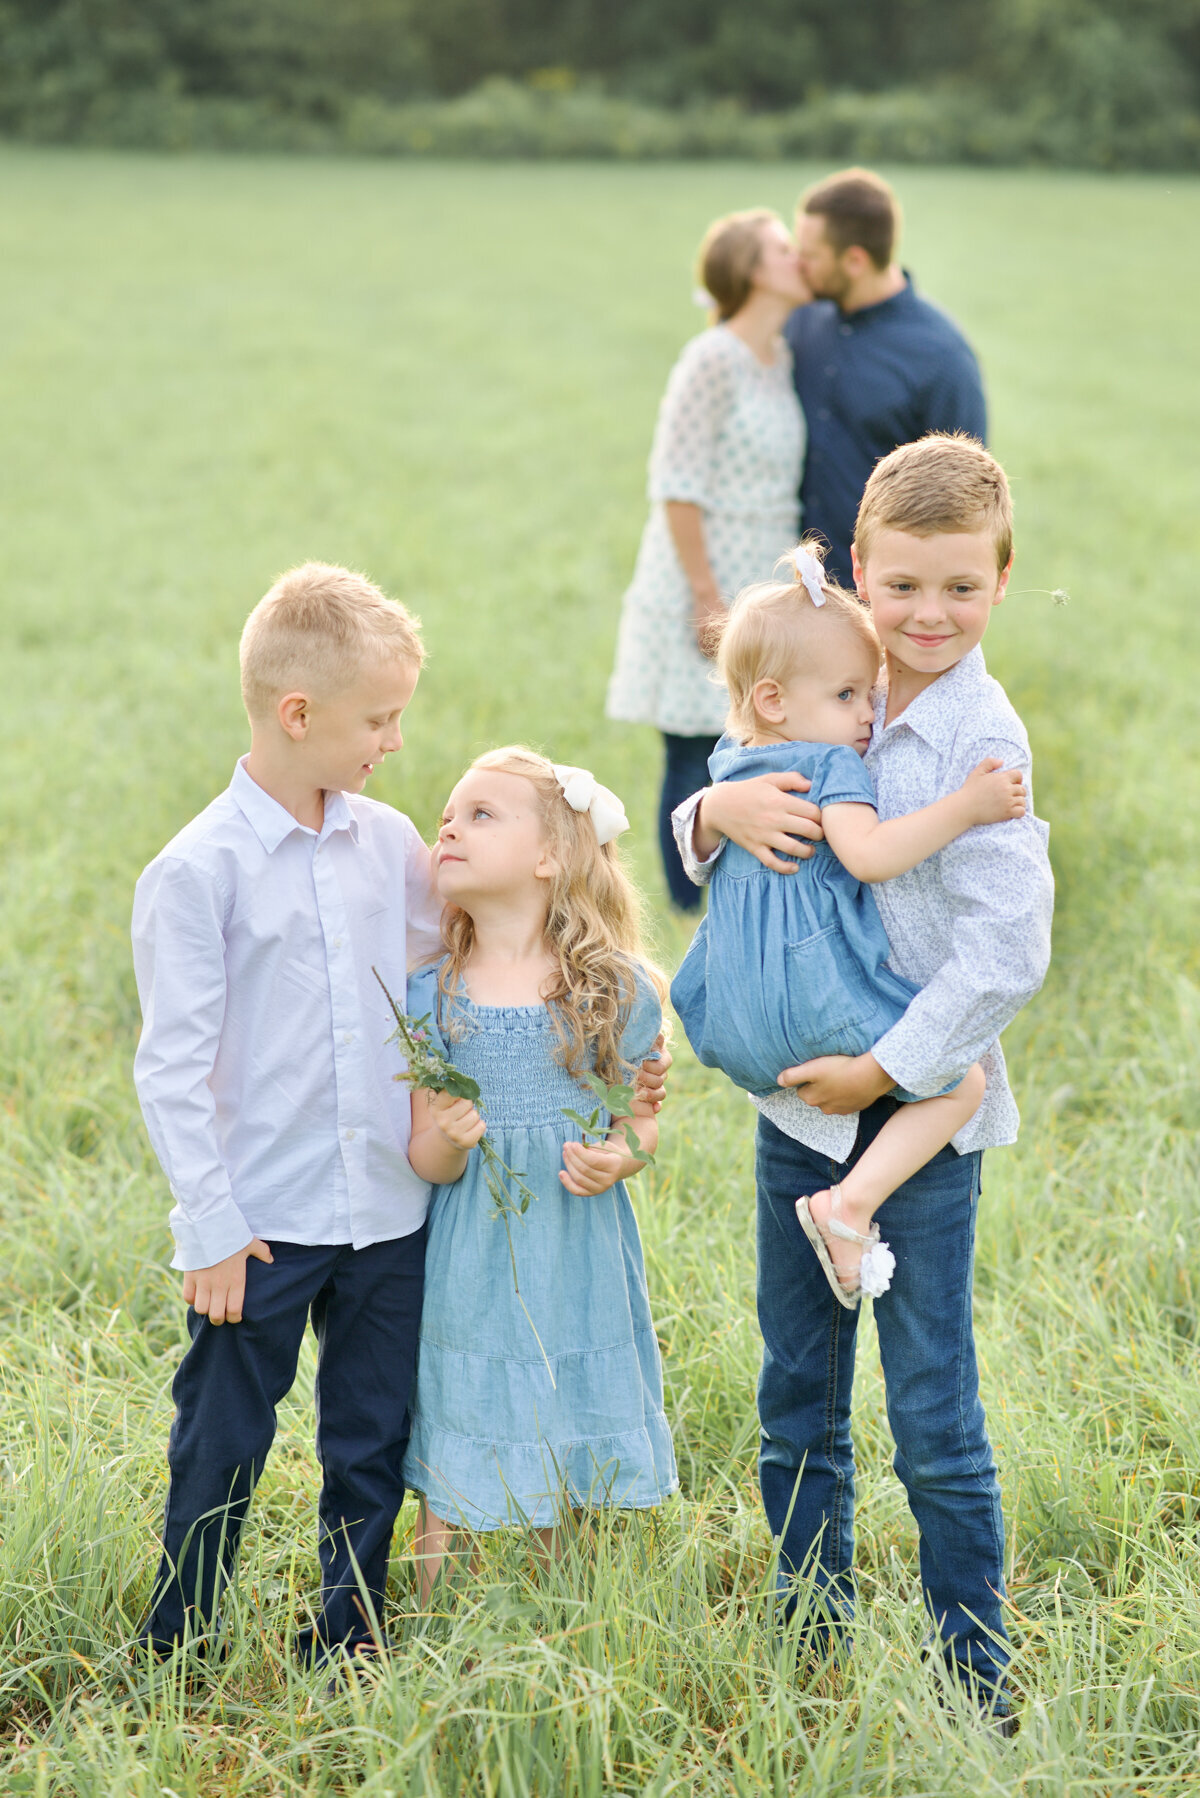 Kids with parents kissing in the background at a family photo session in mount vernon, ohio